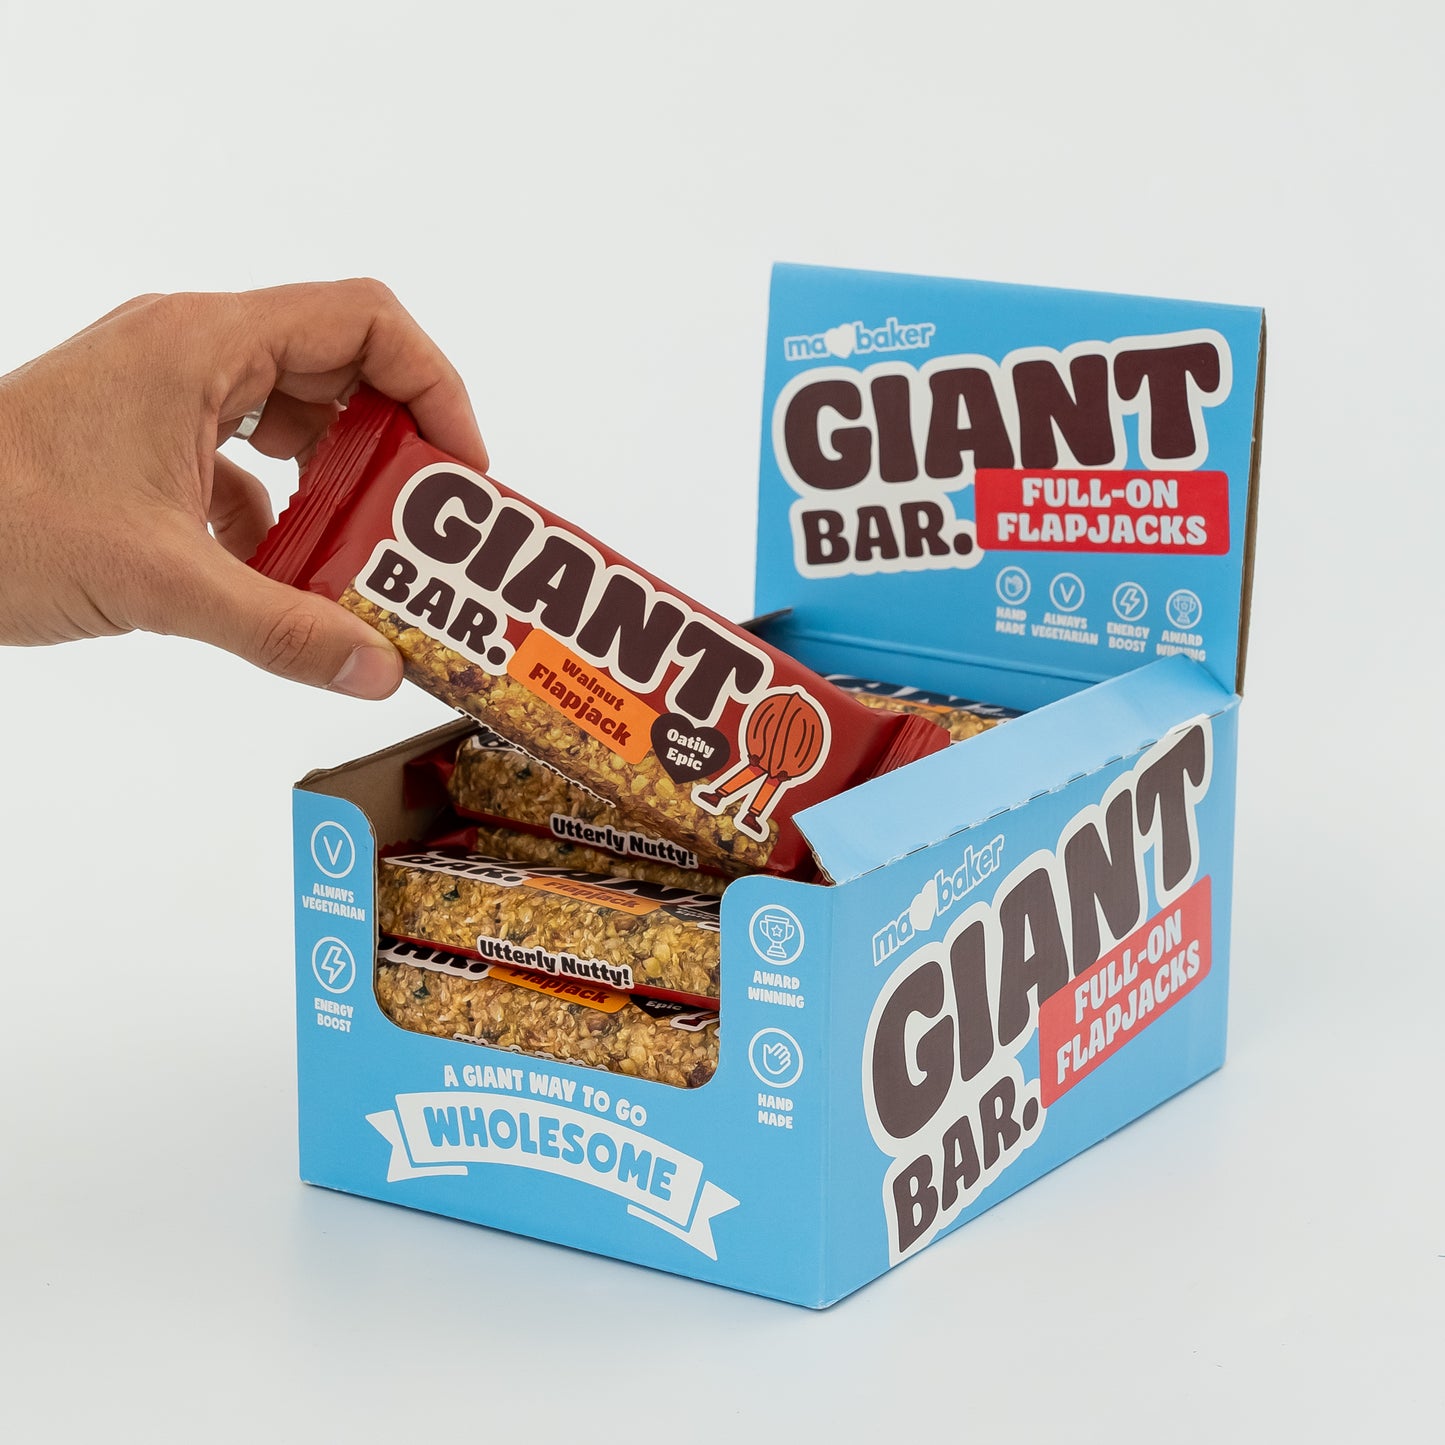 A hand taking a Walnut Giant Bar from a box of Giant Bars